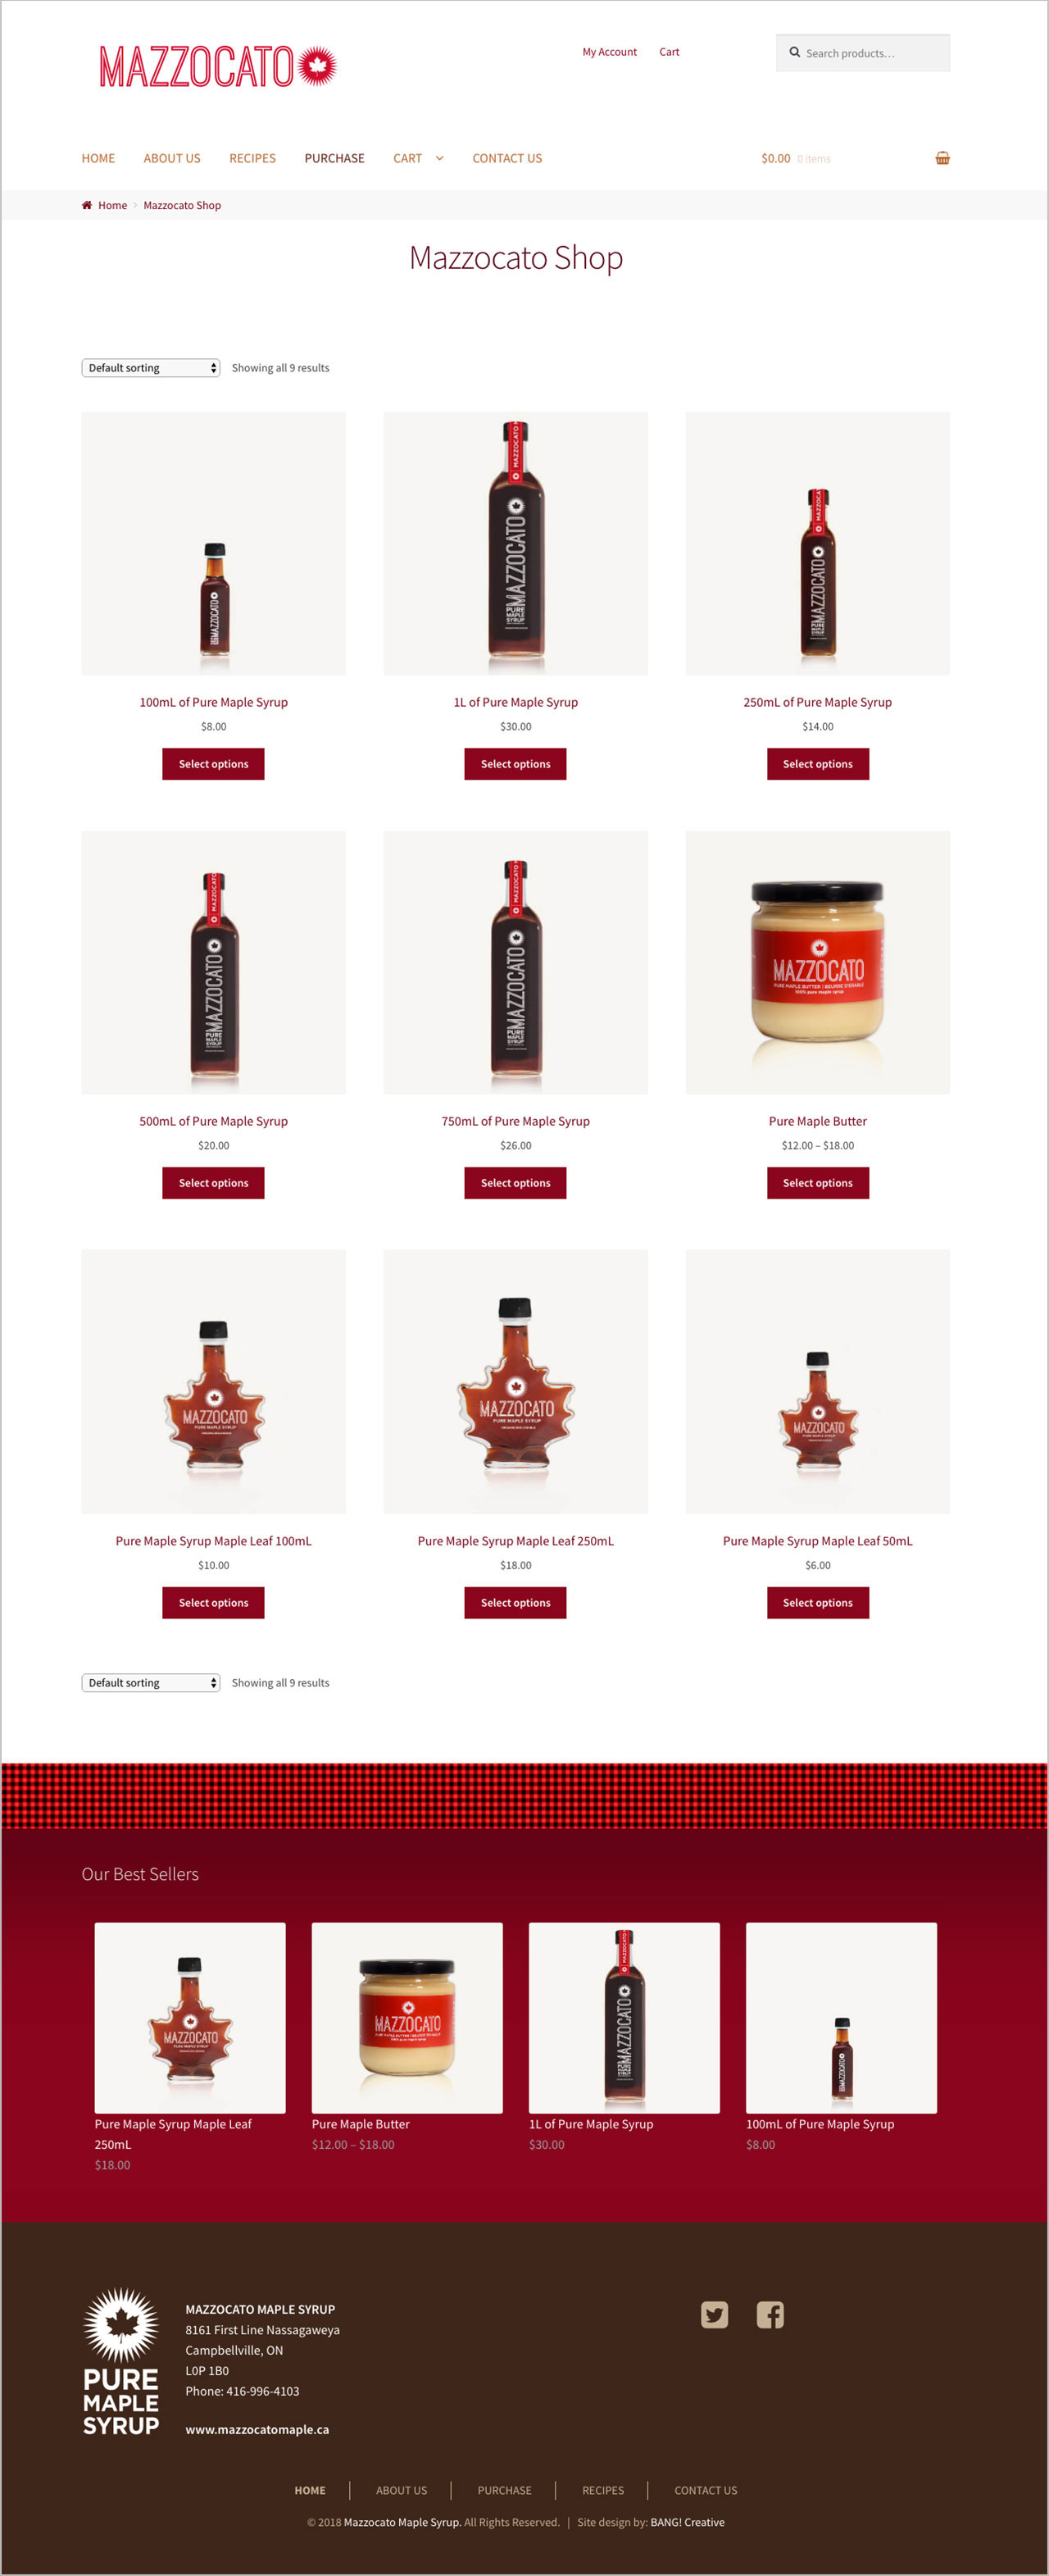 Website Design of Mazzocato Maple Syrup by BANG! creative strategy by design